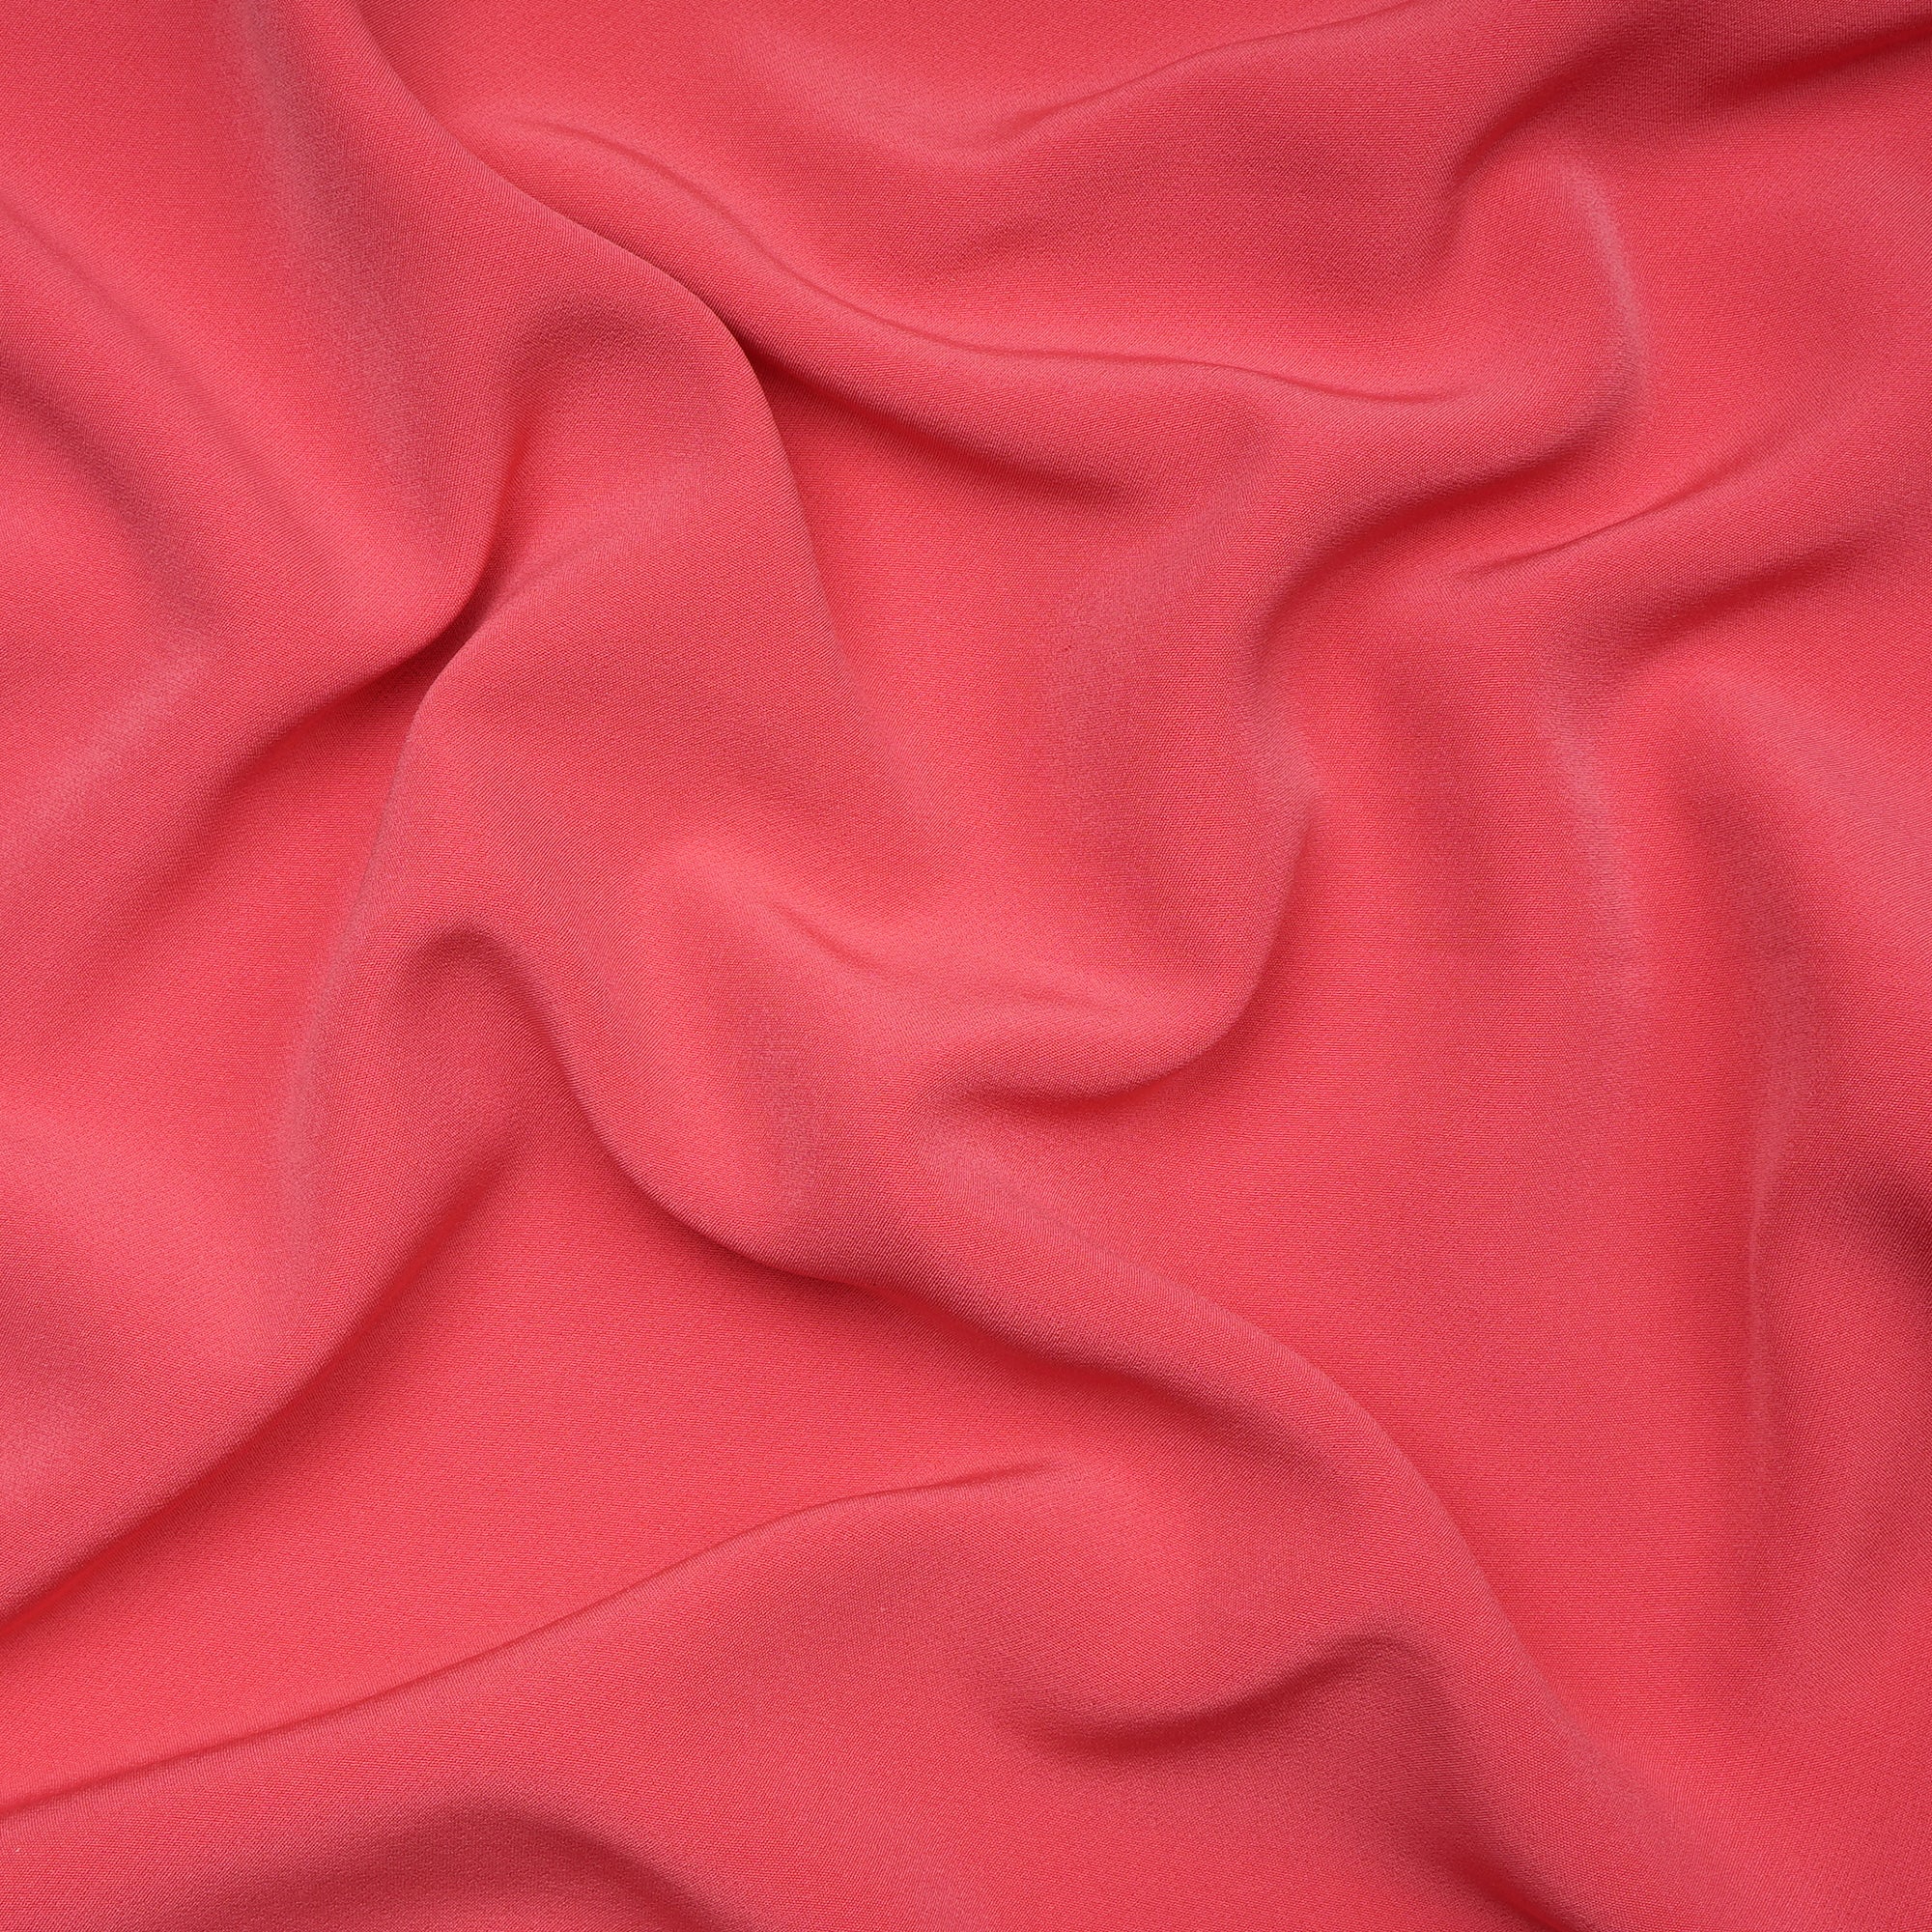 Paradise Pink Solid Dyed Imported Banana Crepe Fabric (60" Width)